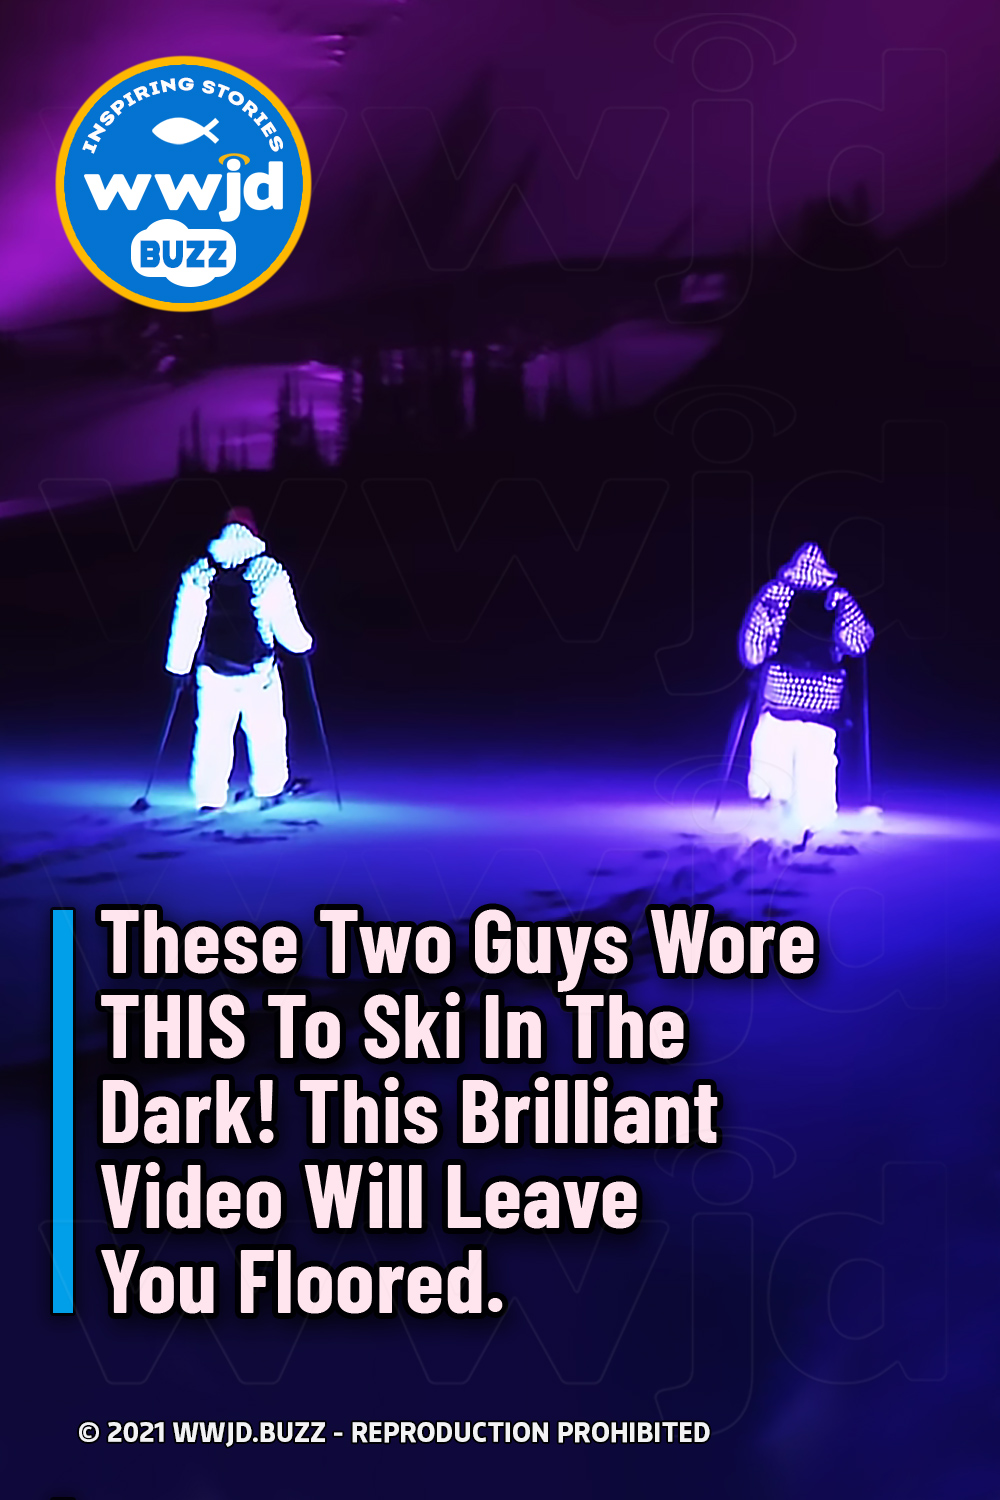 These Two Guys Wore THIS To Ski In The Dark! This Brilliant Video Will Leave You Floored.